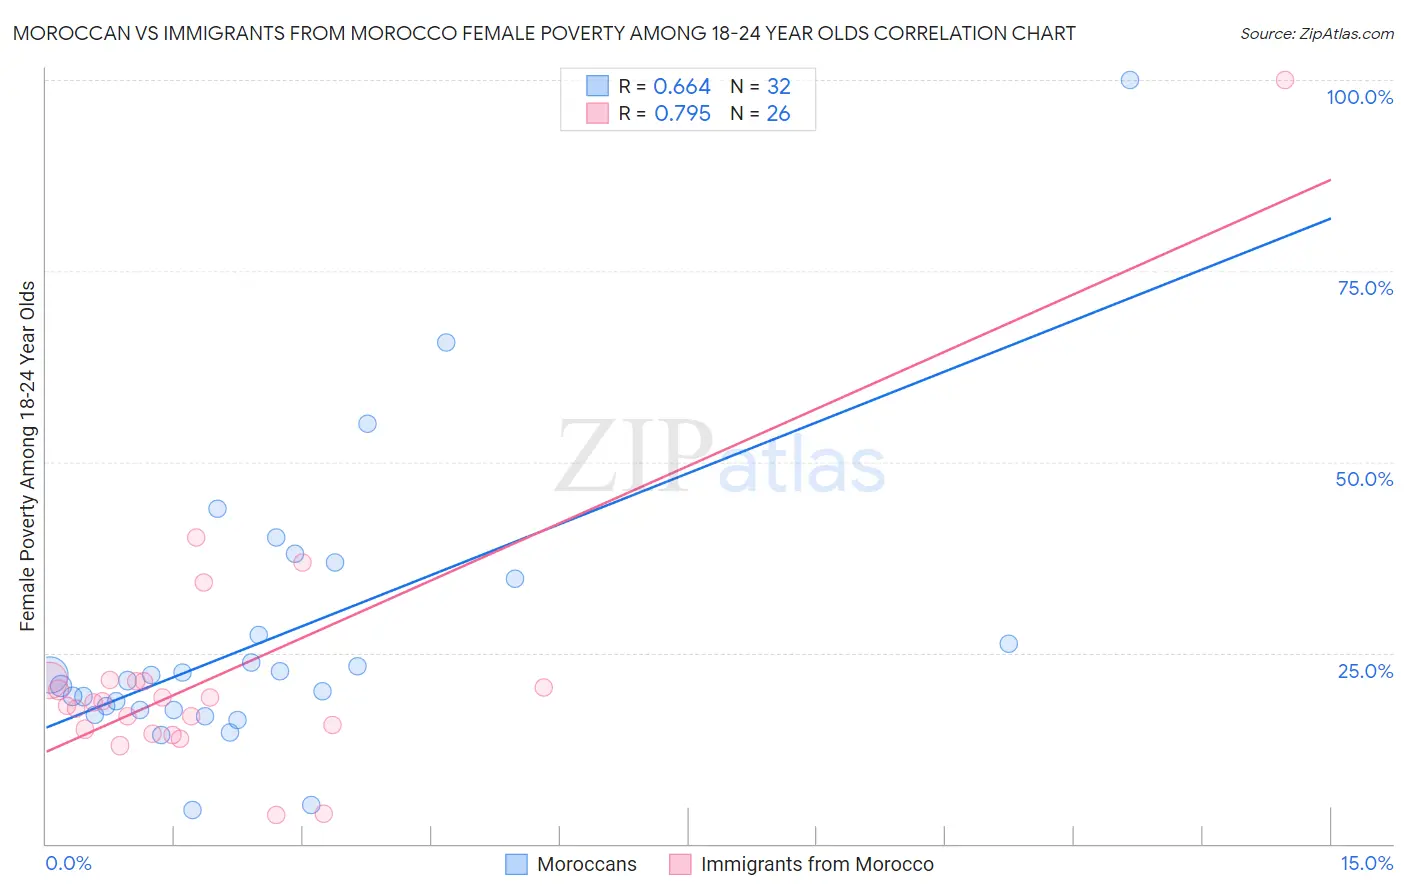 Moroccan vs Immigrants from Morocco Female Poverty Among 18-24 Year Olds